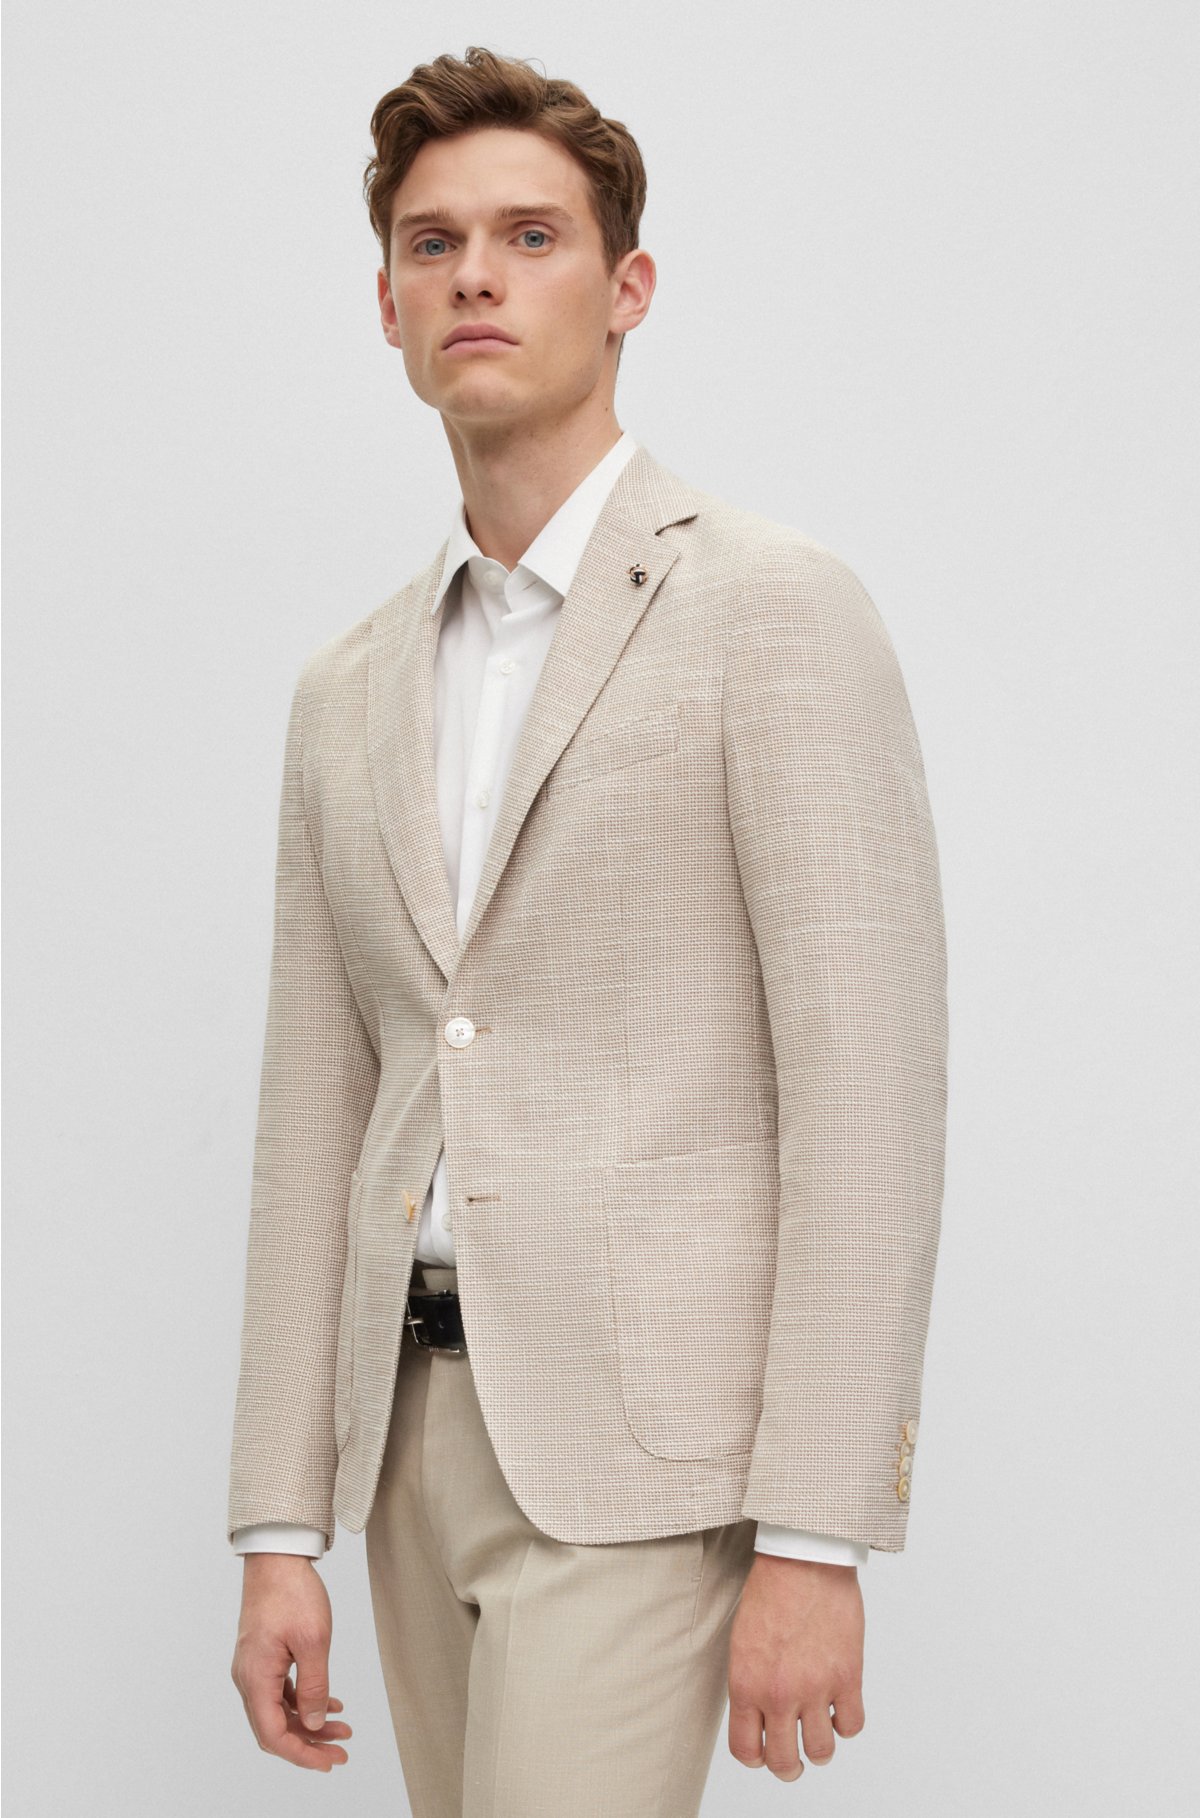 BOSS - Micro-pattern slim-fit jacket in a cotton blend